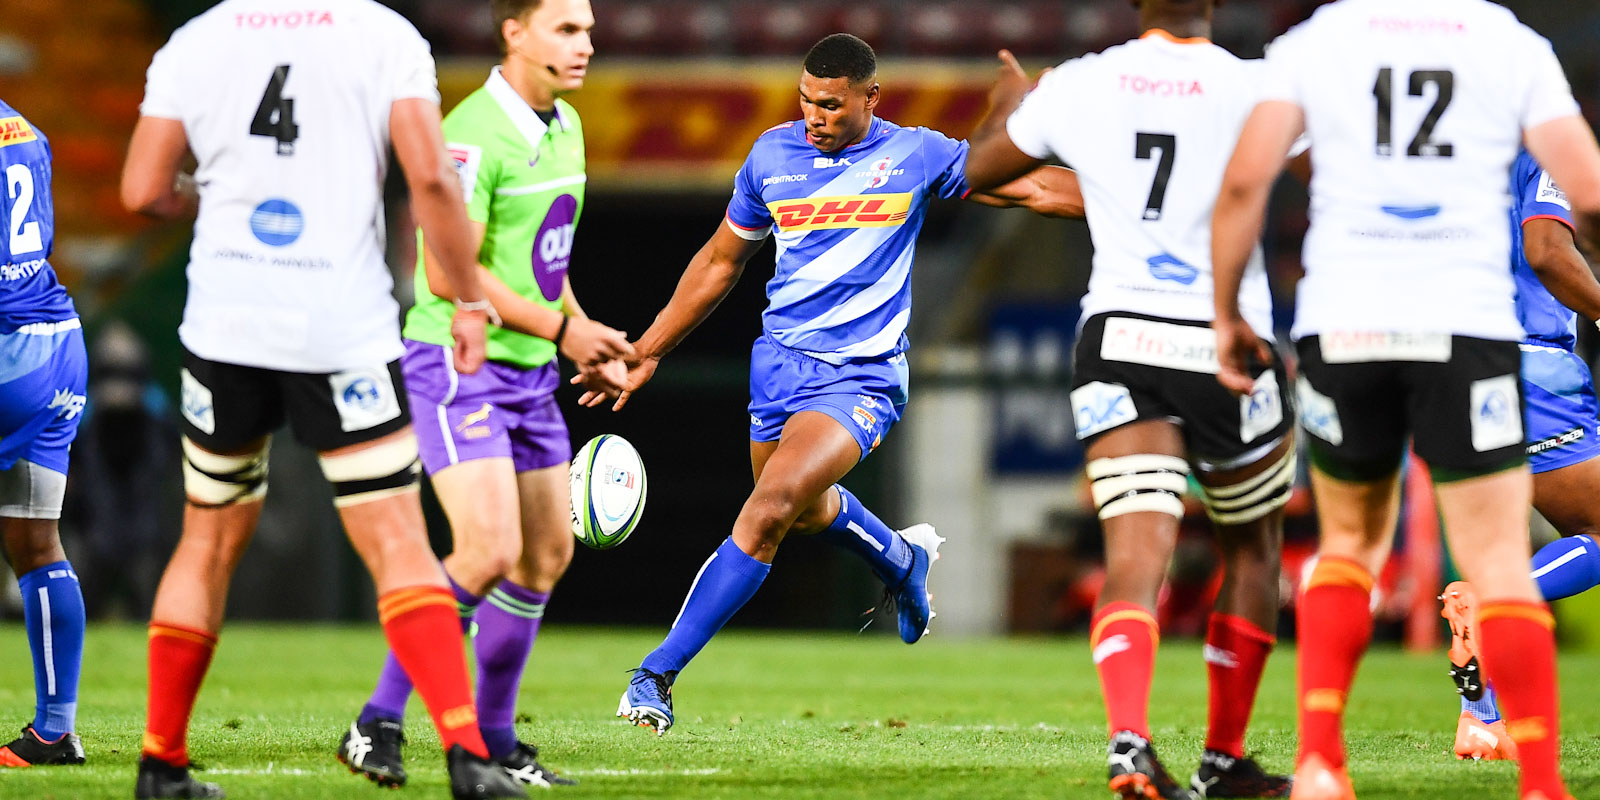 Damian Willemse lines up a monster drop goal.